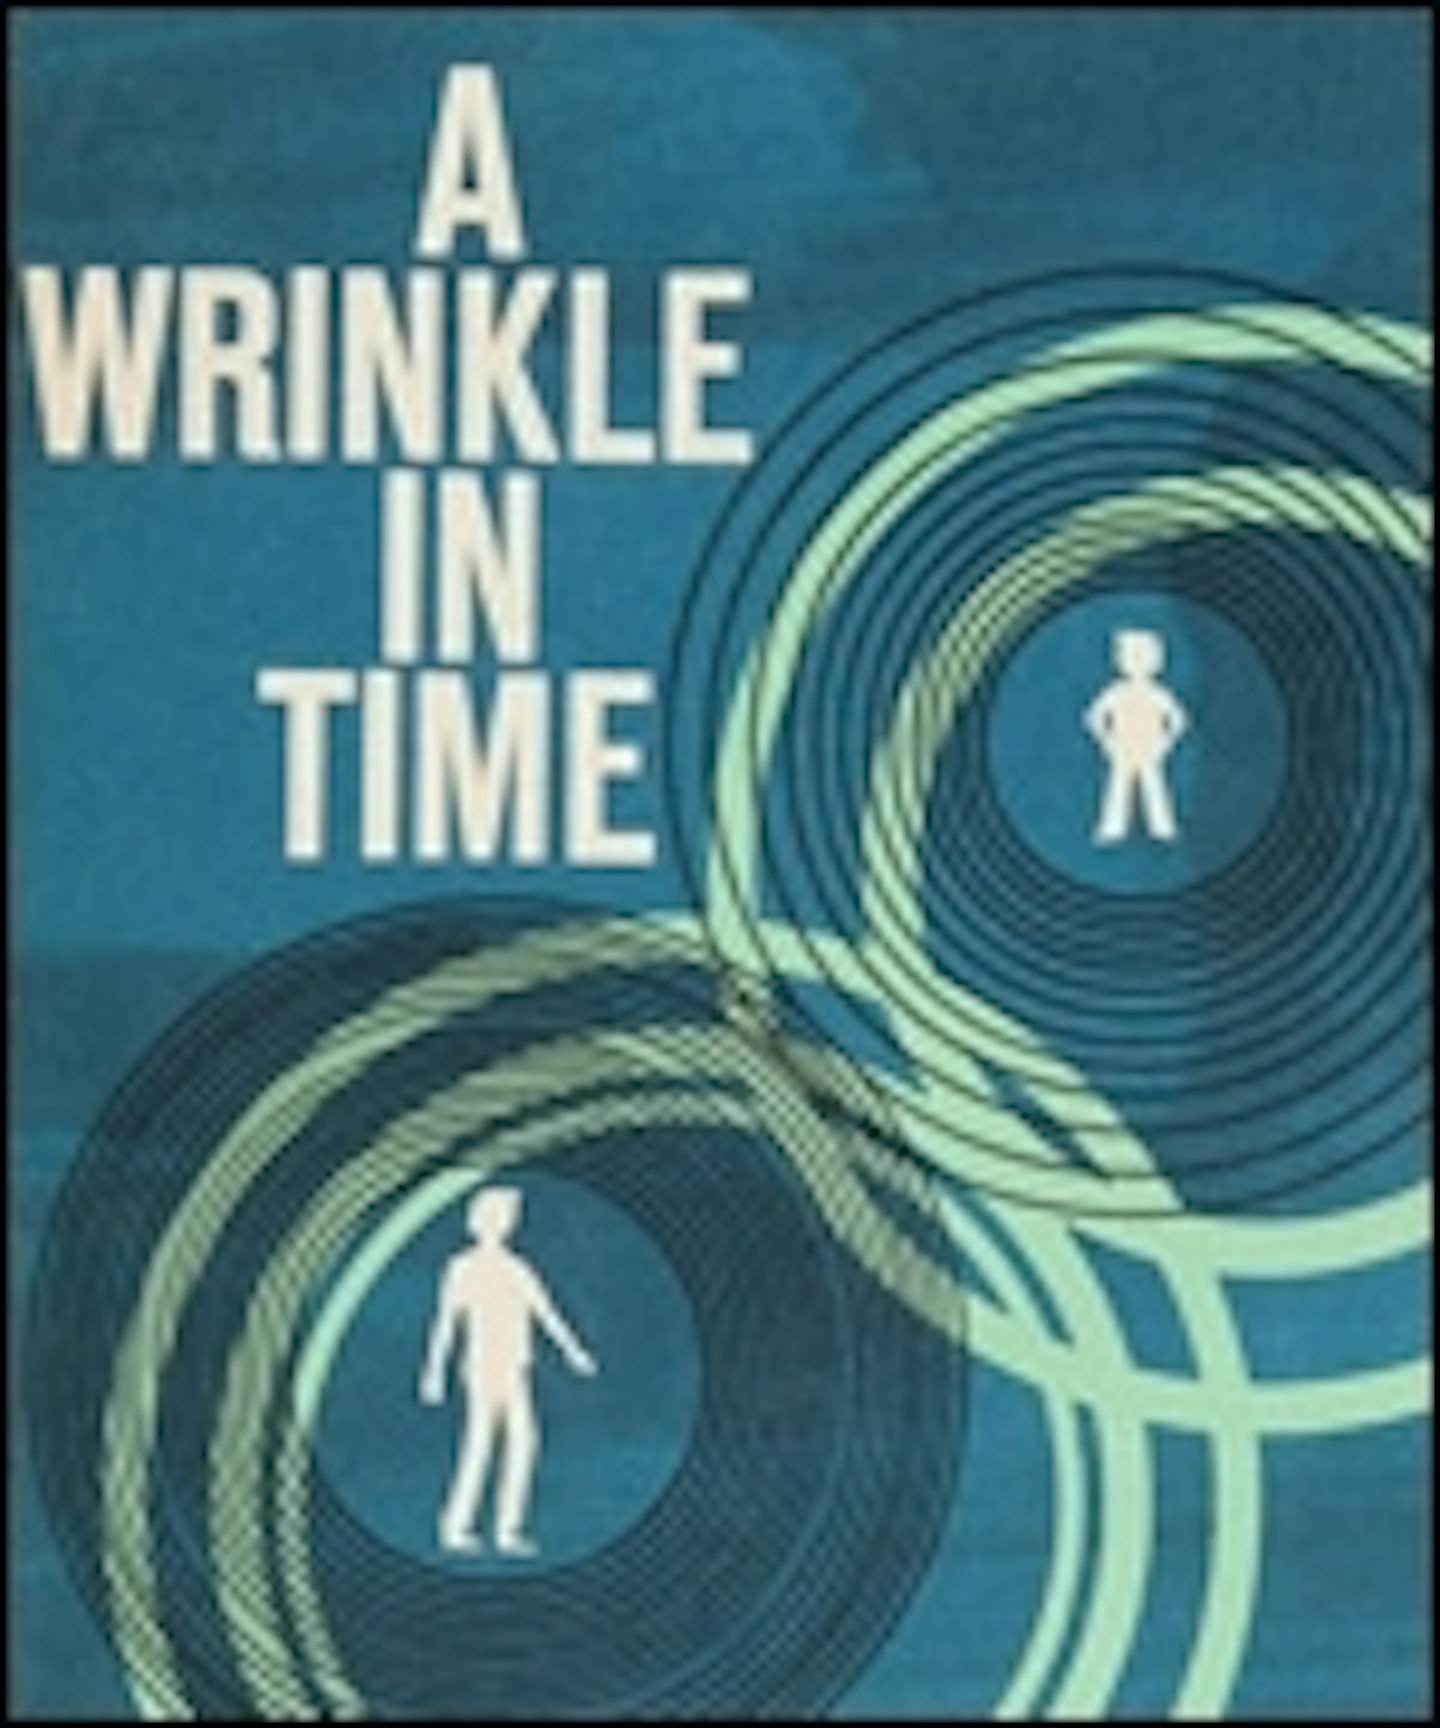 A Wrinkle In Time Set For The Screen